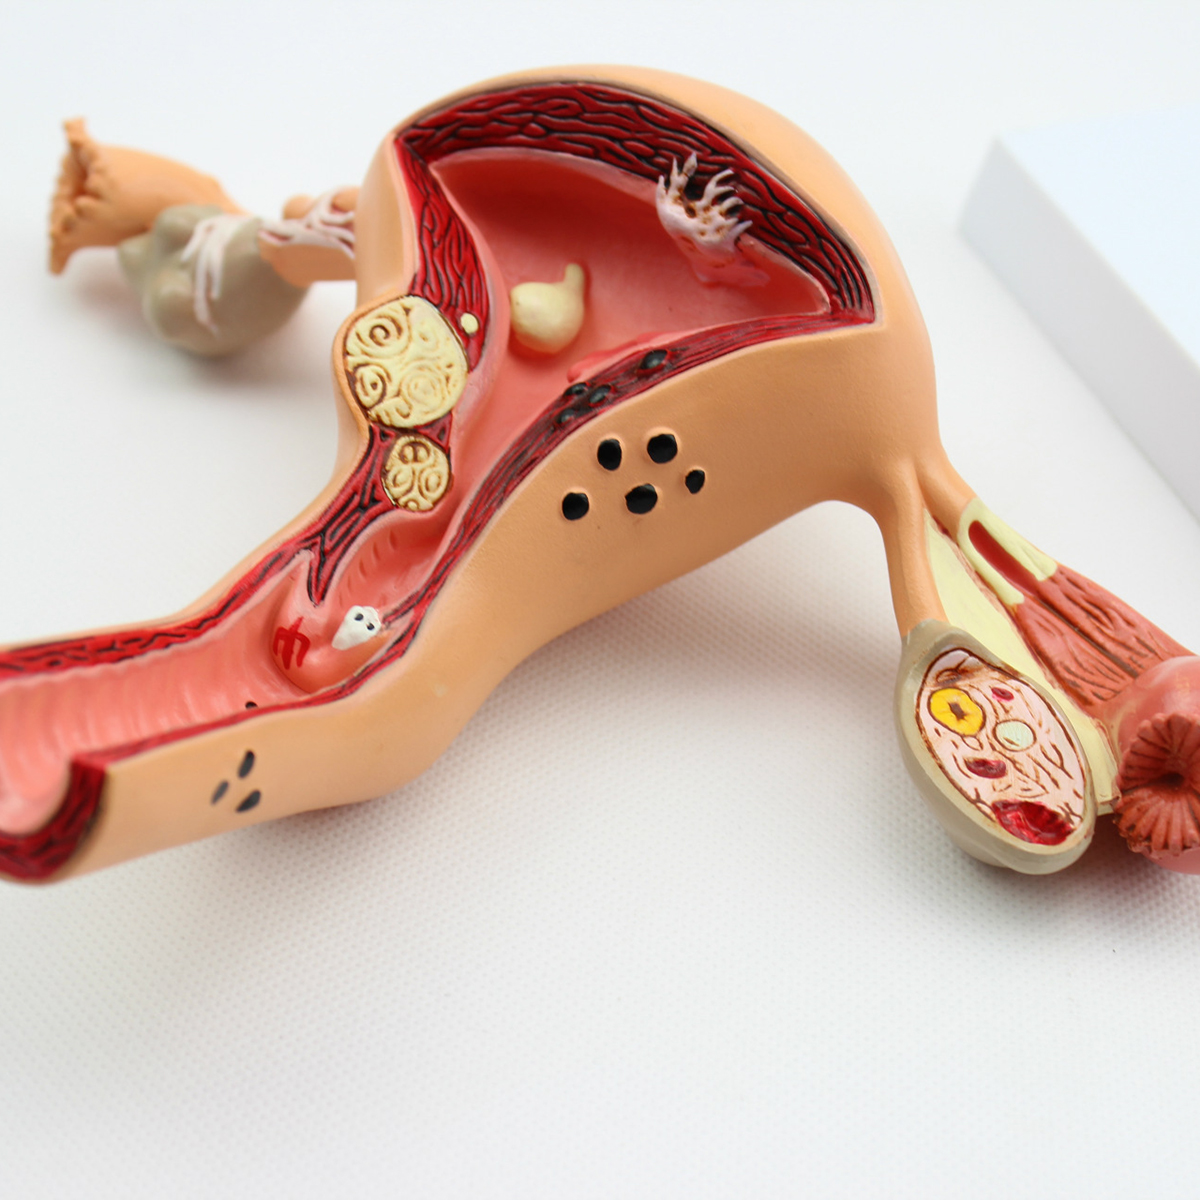 1Pcs-Uterus-Ovary-Anatomical-Medical--Model-Anatomy-Cross-Section-Science-Toy-With-Base-1422991-4